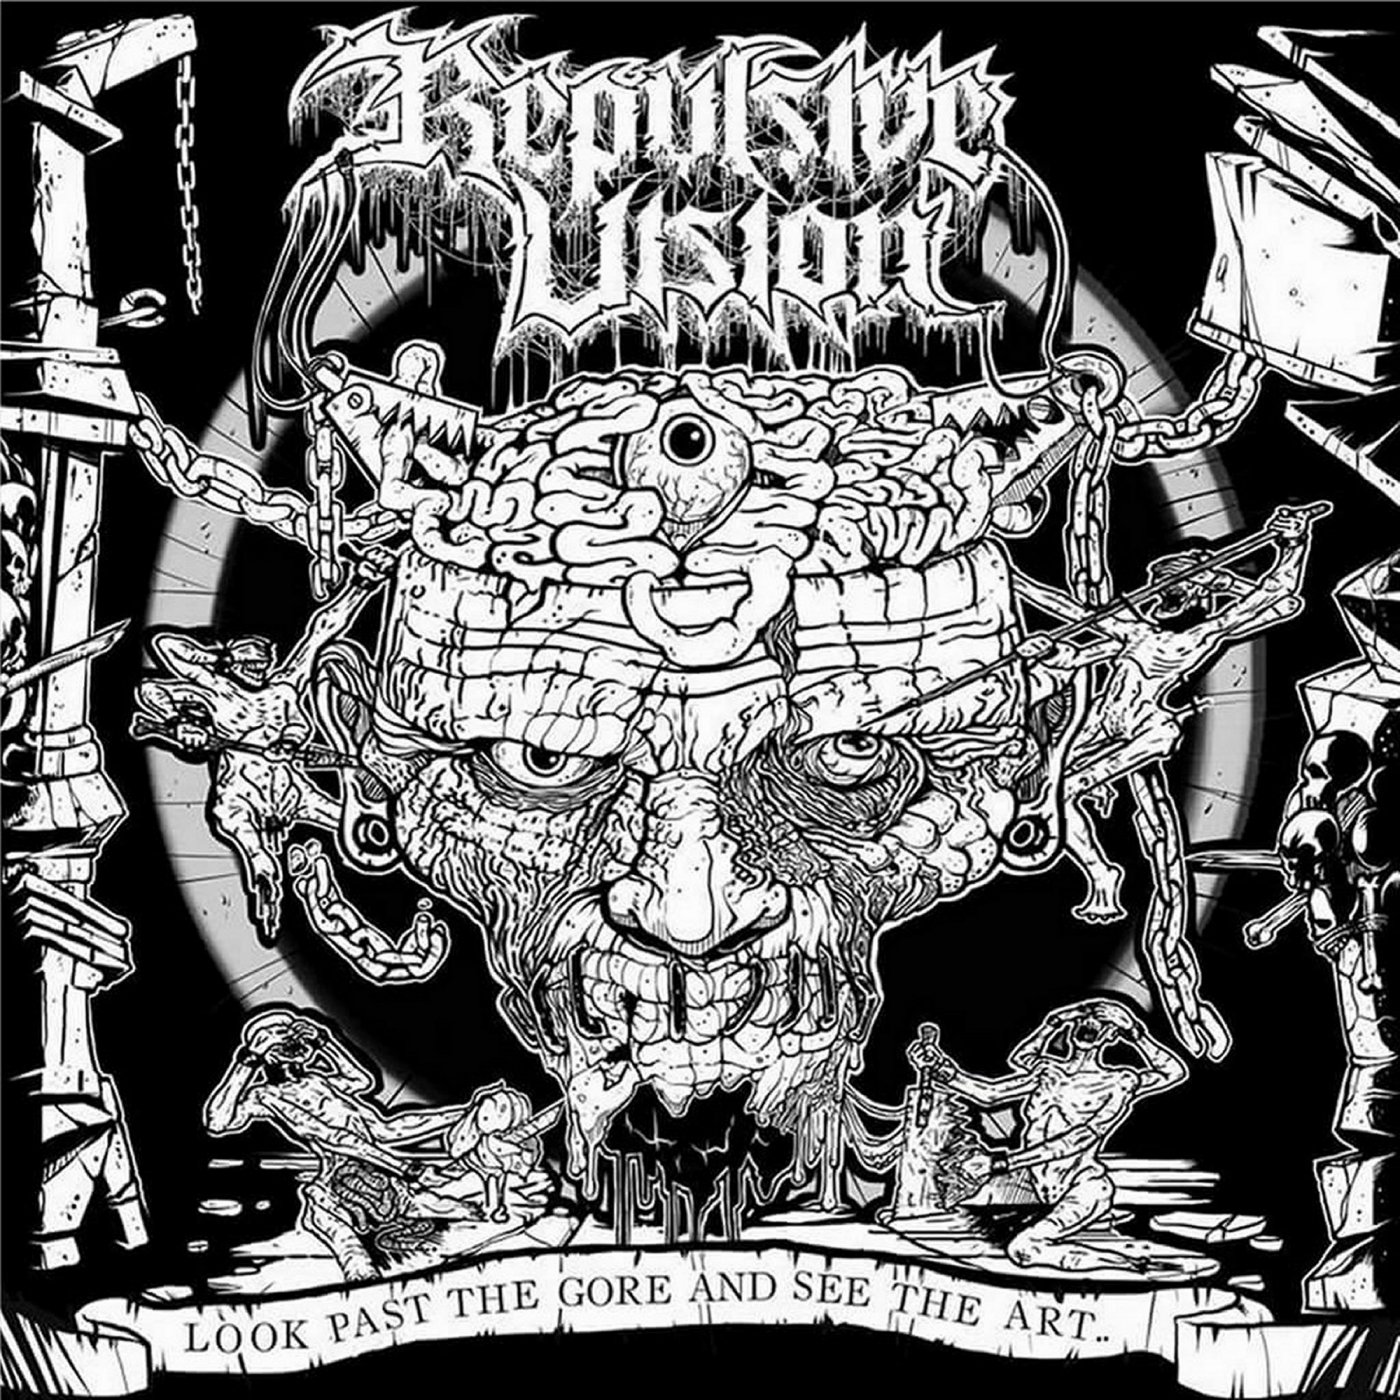 REPULSIVE VISION – “Look Past The Gore And See The Art”